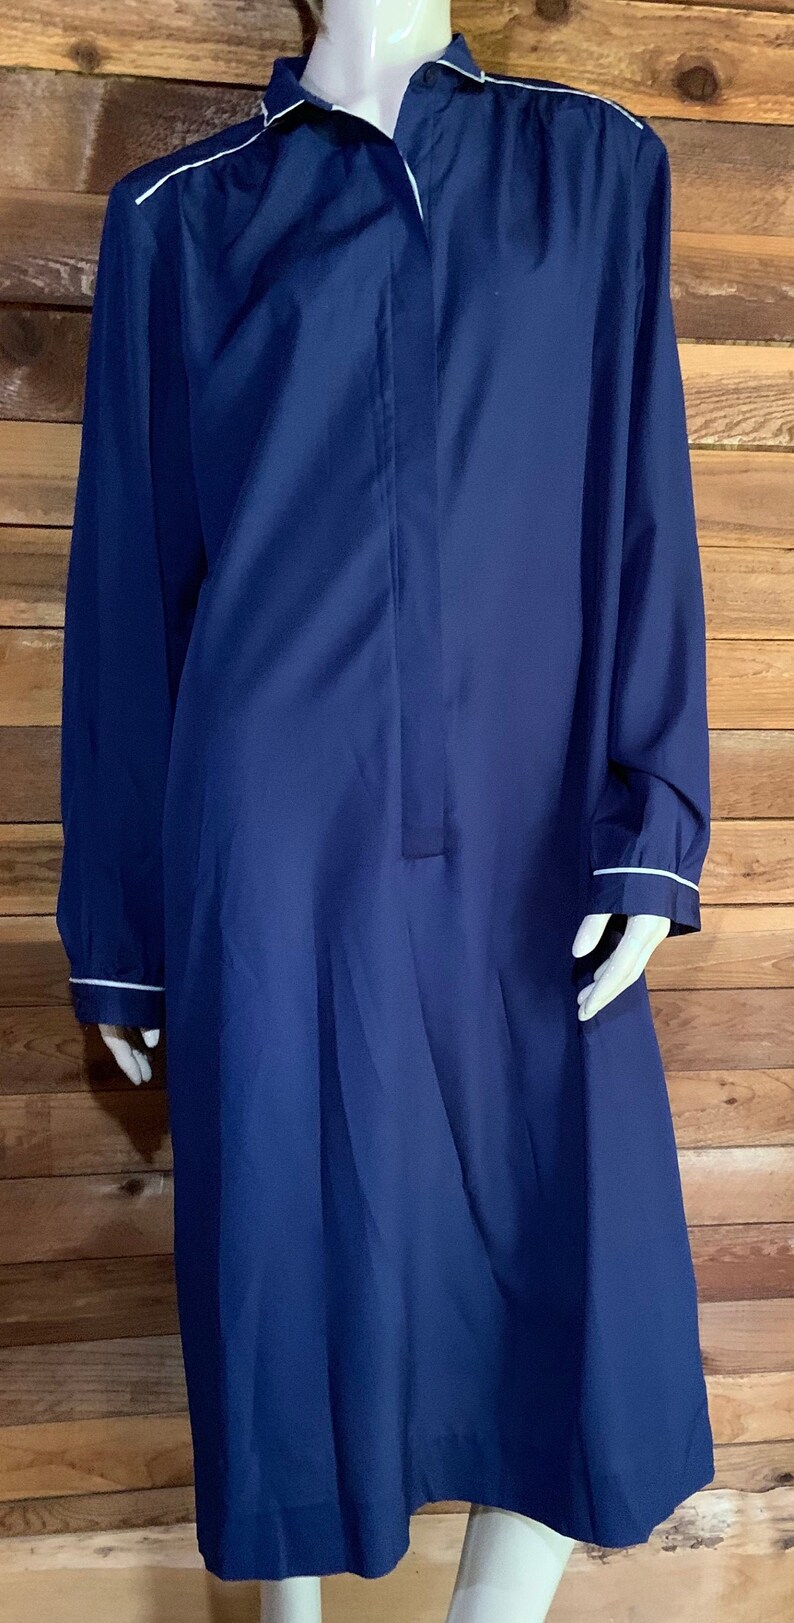 Vintage 1970s JEANNE DURRELL Navy Blue Shift Dress by the - Etsy